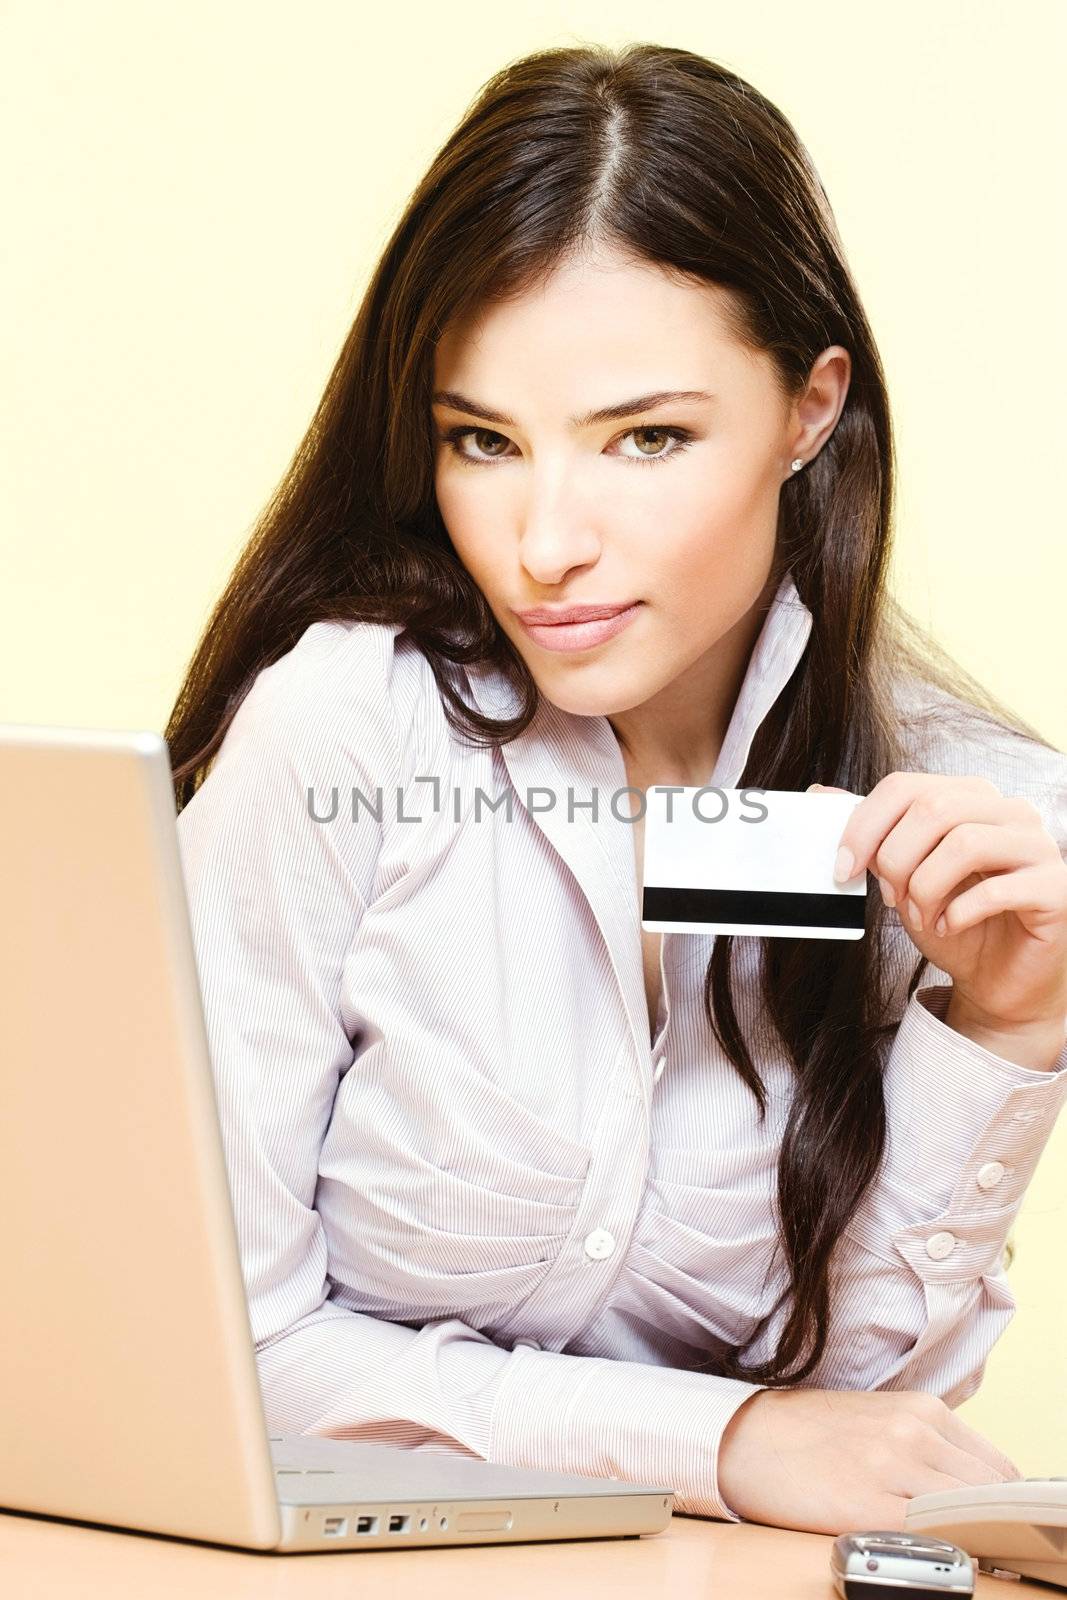 Beautiful young woman sitting near laptop and mobile phone holding credit card in her left hand